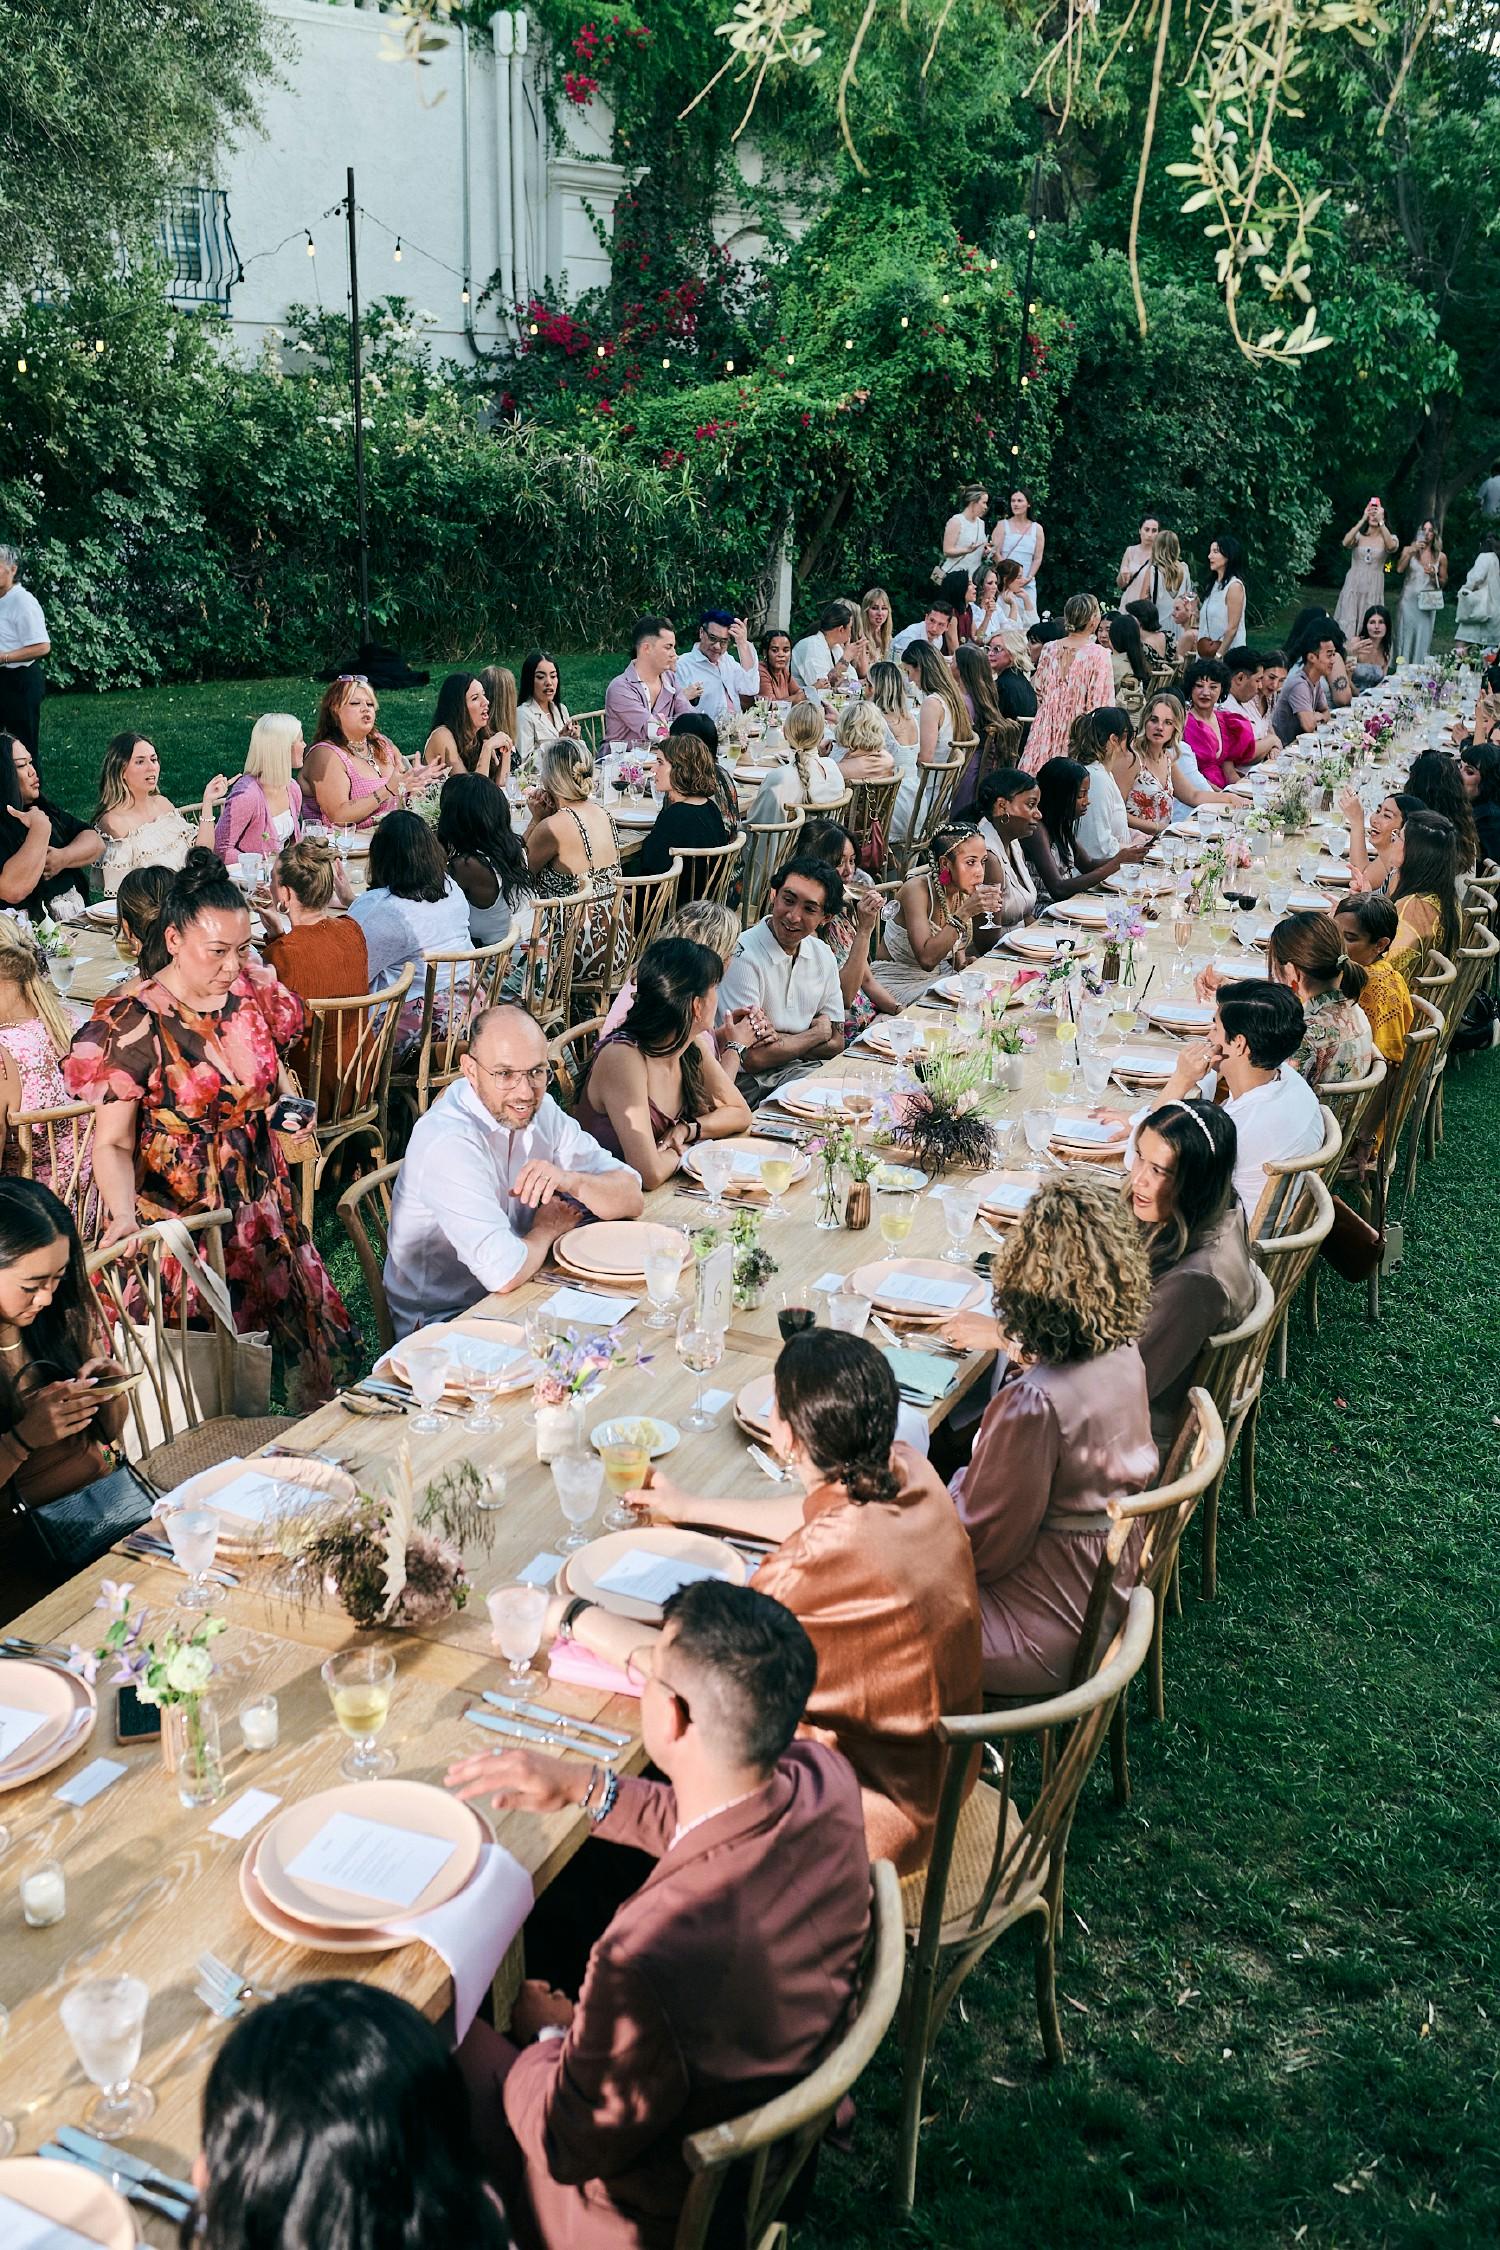 The Reset dinner at our 2023 annual off-site event invited the ILIA team to enjoy an evening rooted in community.